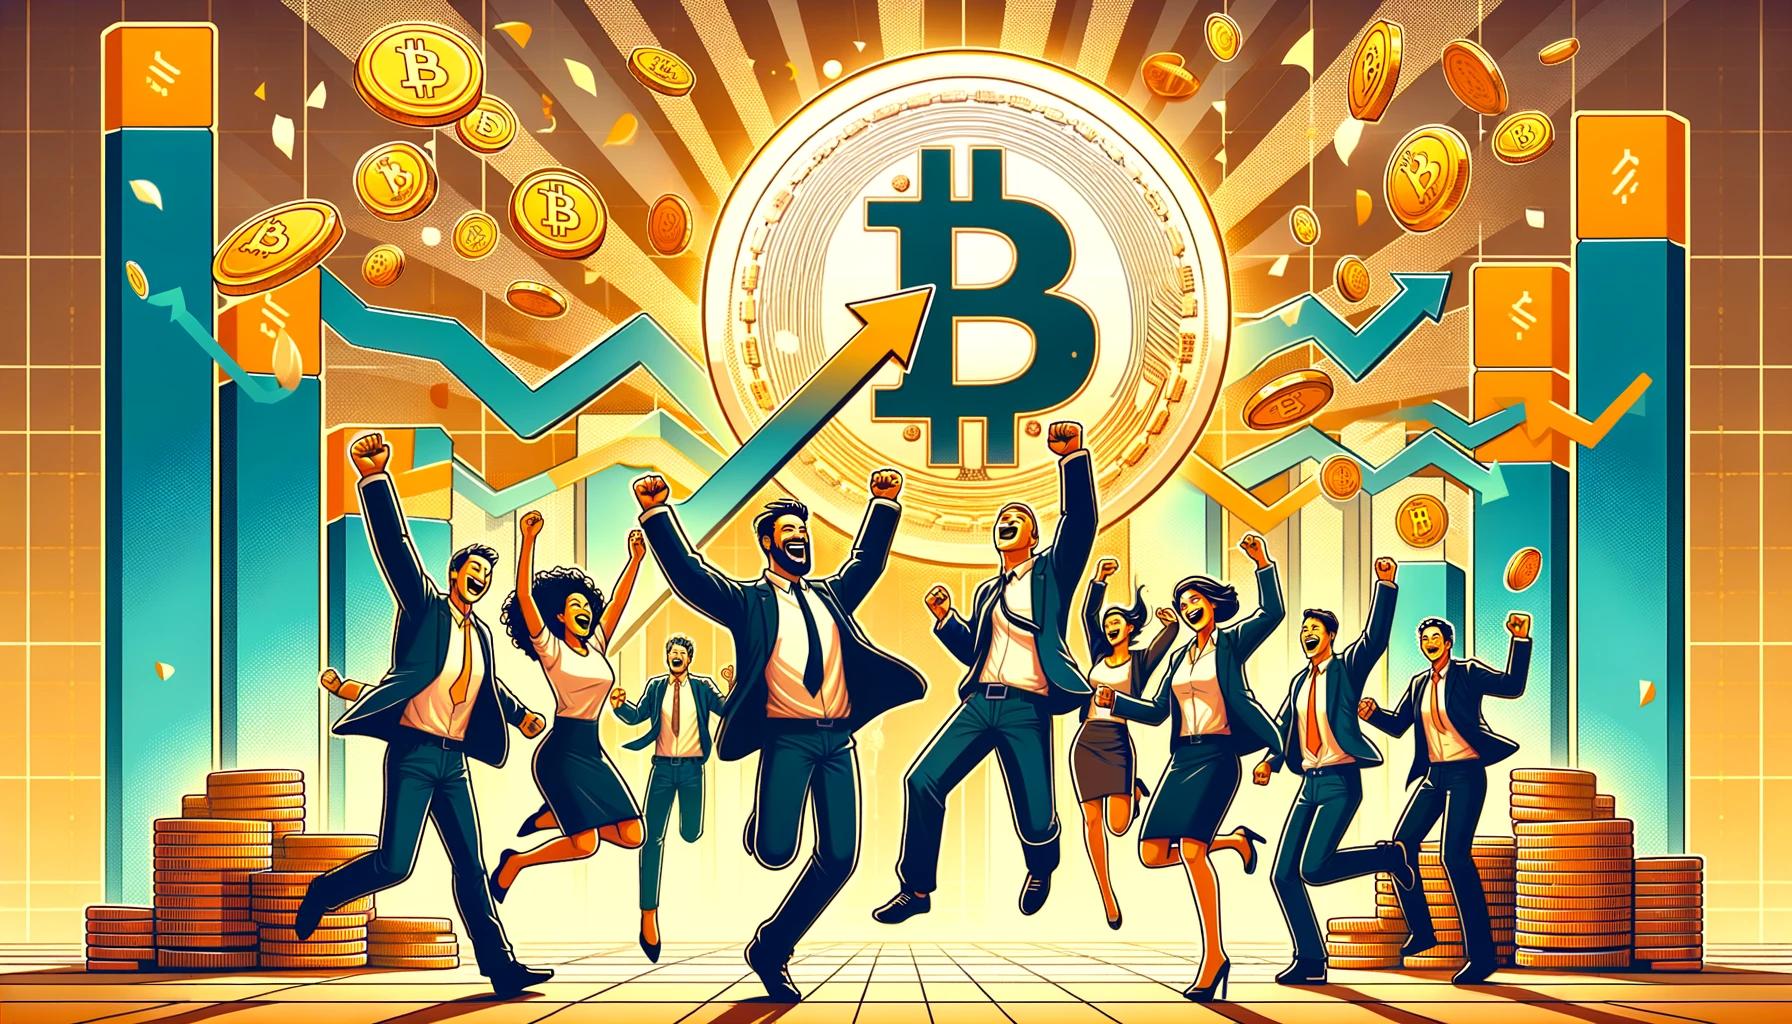 99% Bitcoin addresses in profit as price soars to $63K: What now?